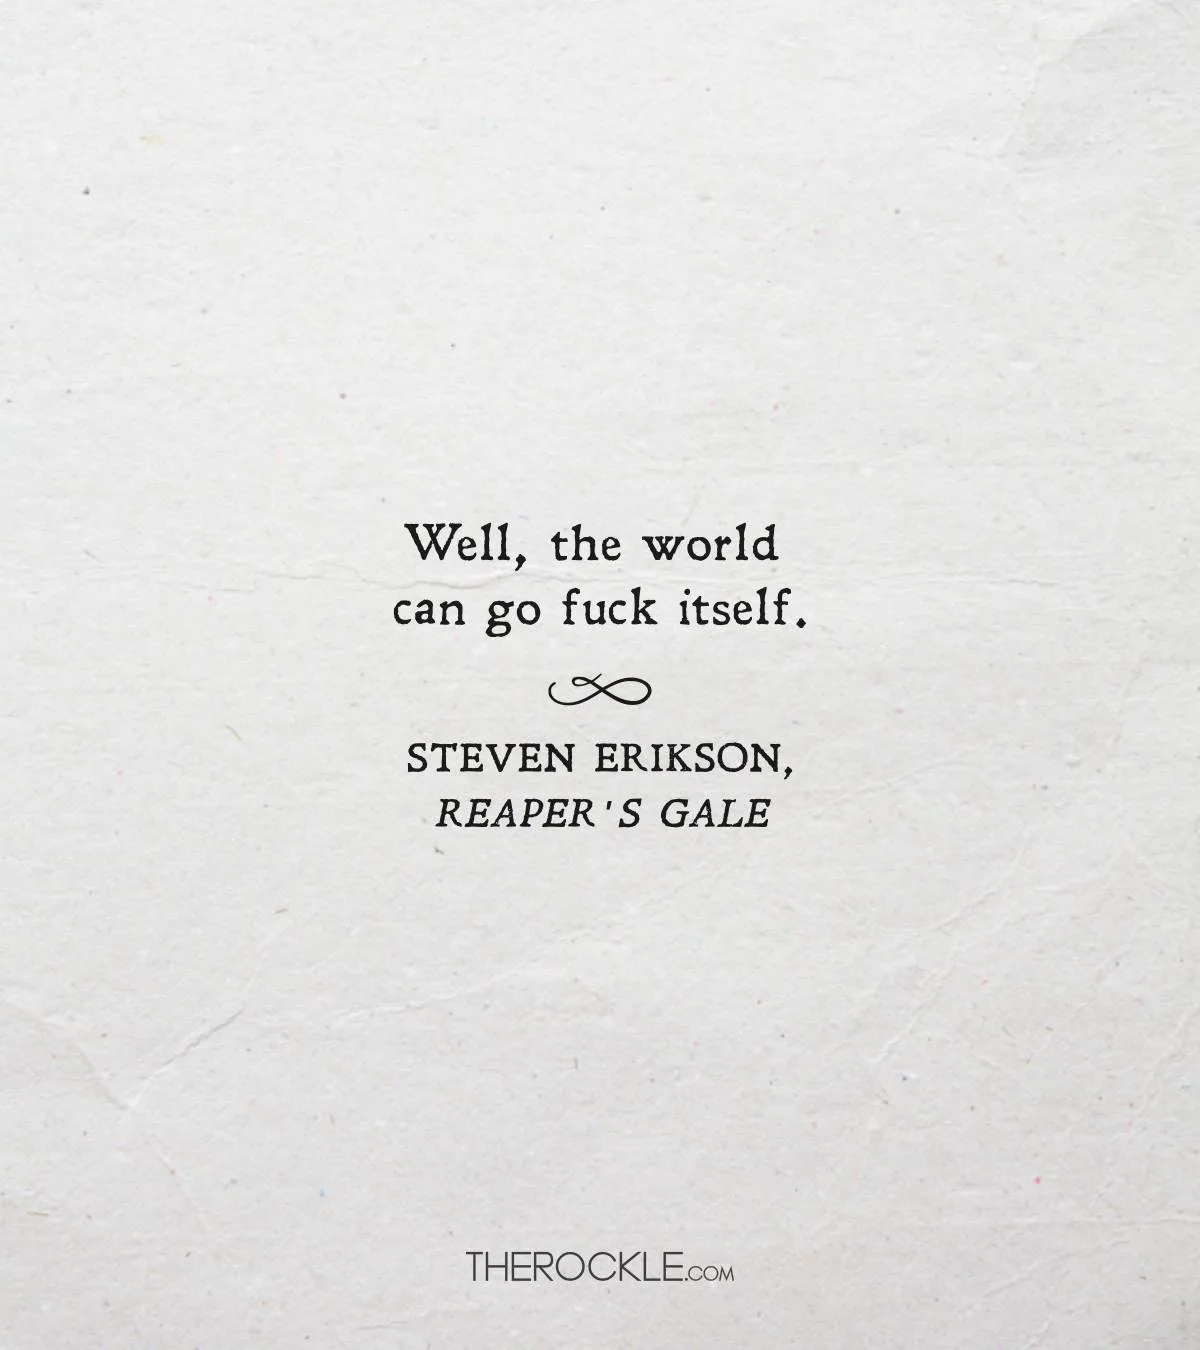 Quote from Steven Erikson's Reaper’s Gale book